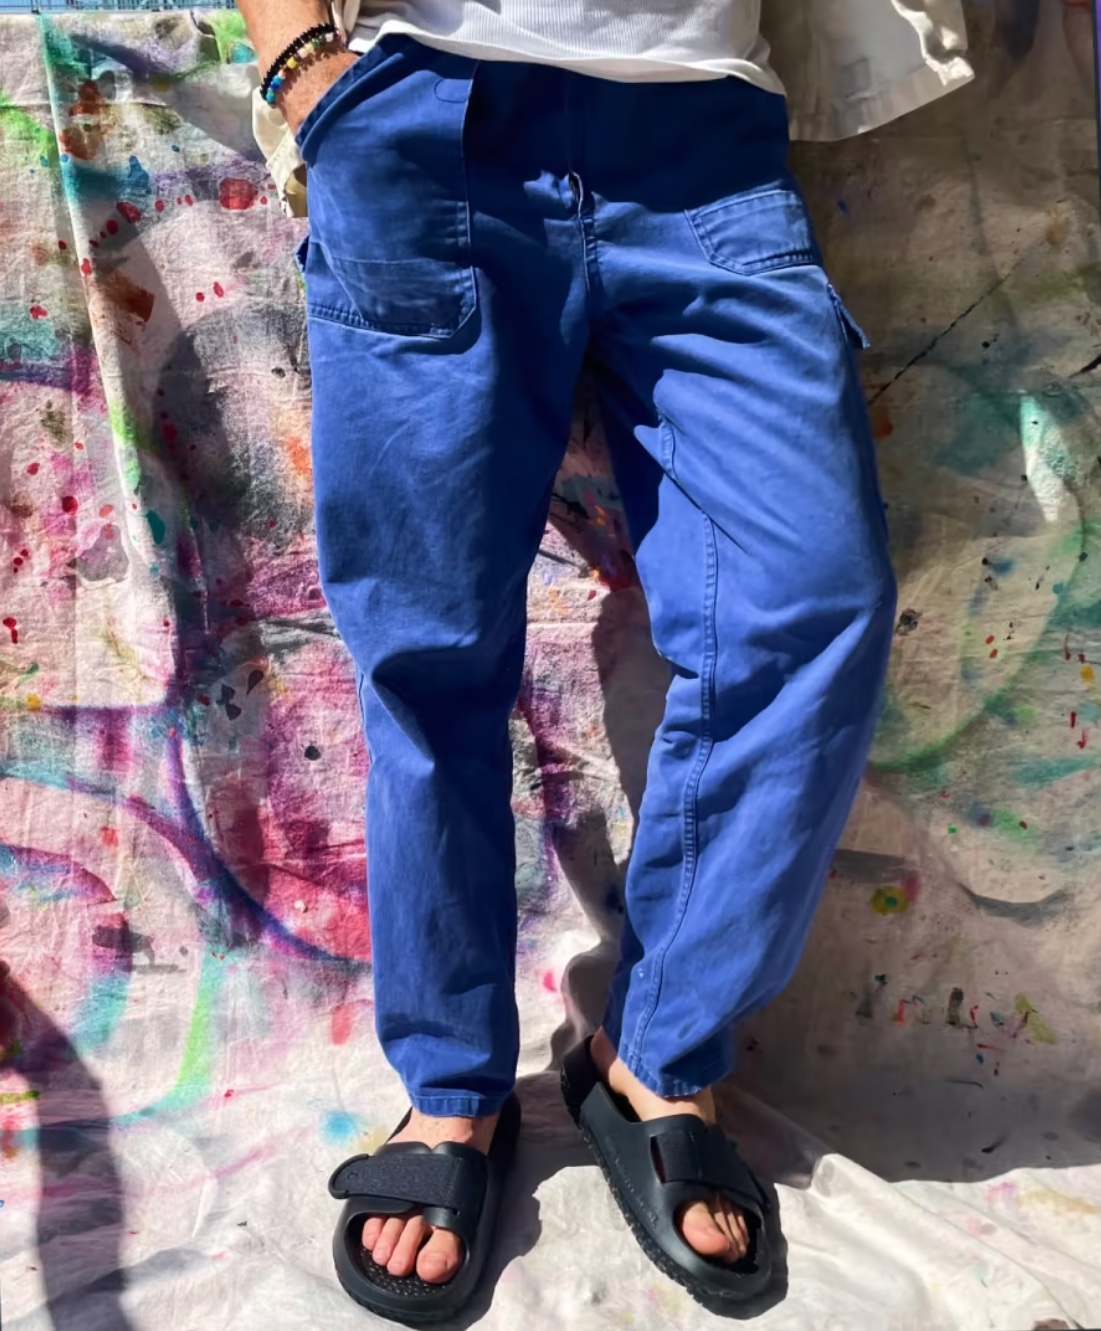 The lower half of a person's body leans against a painted canvas drop cloth, wearing blue pants and black Allbirds sugar glider sandals.